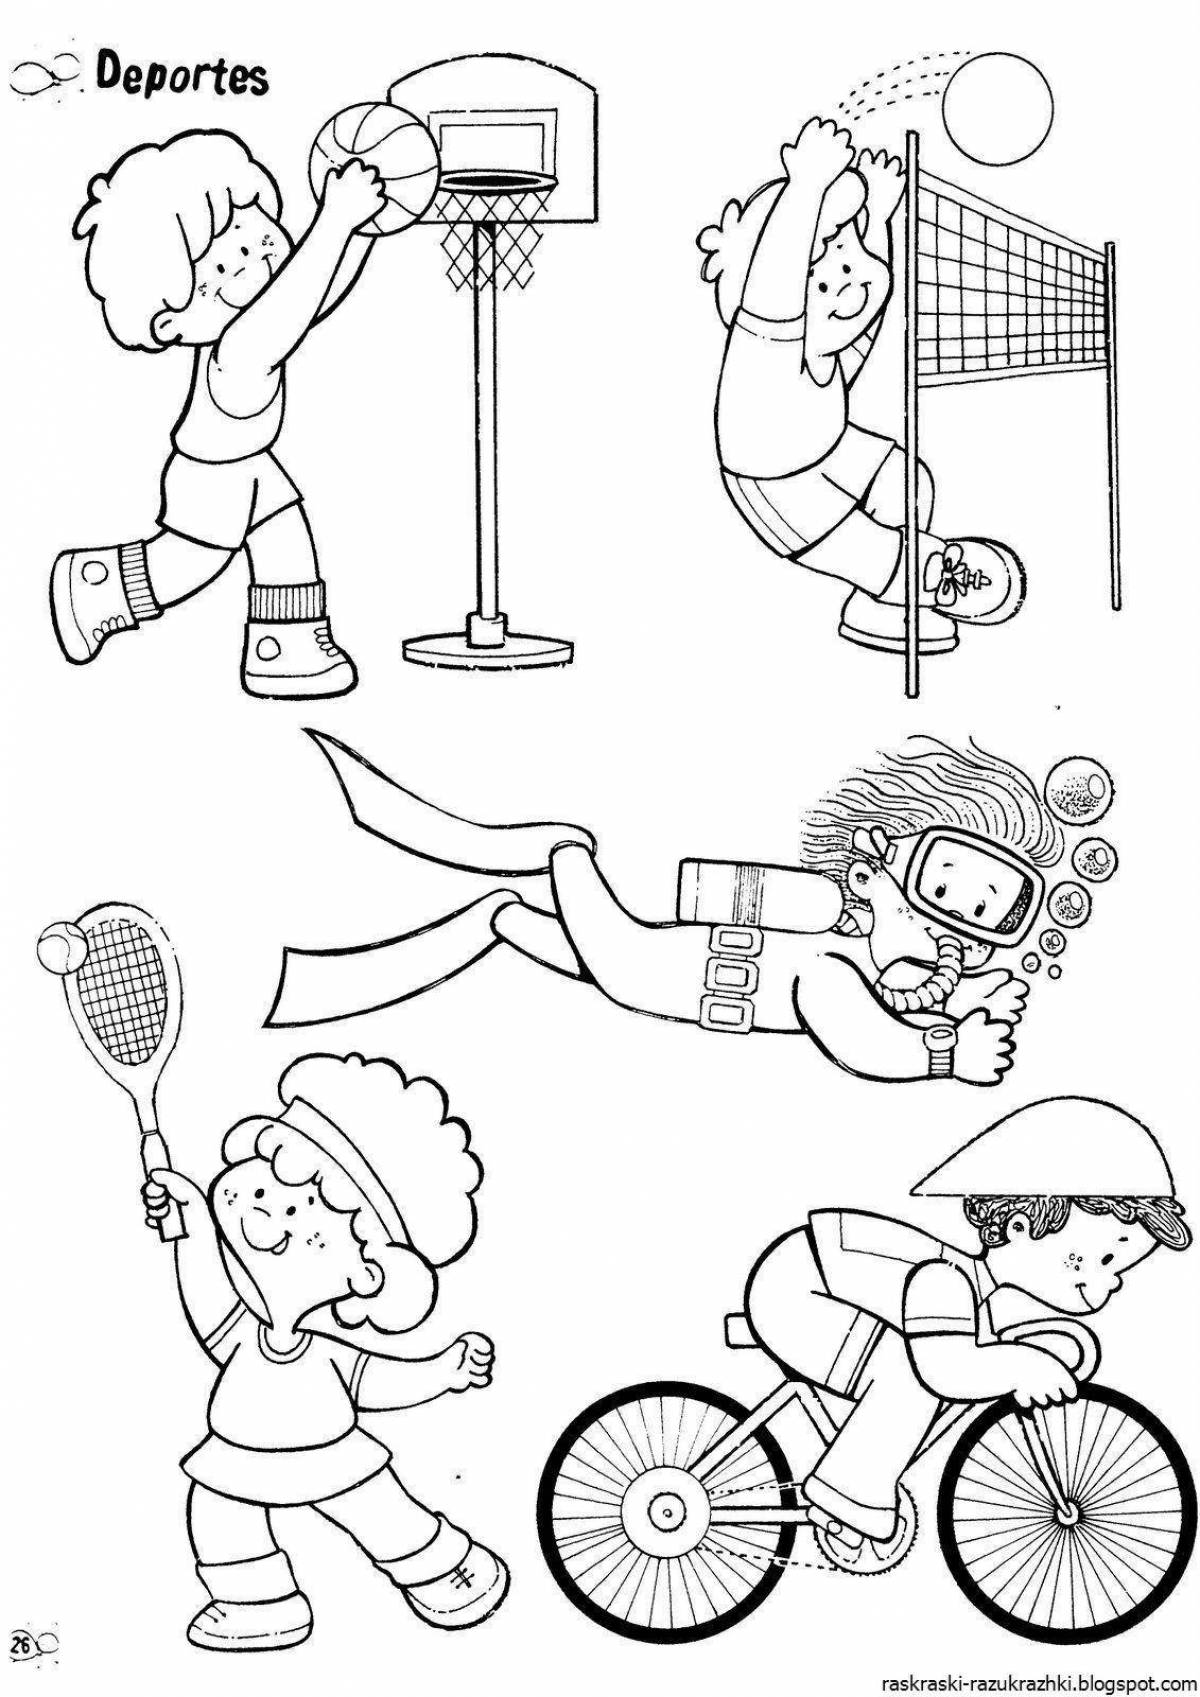 Entertaining sports coloring book for children 4-5 years old